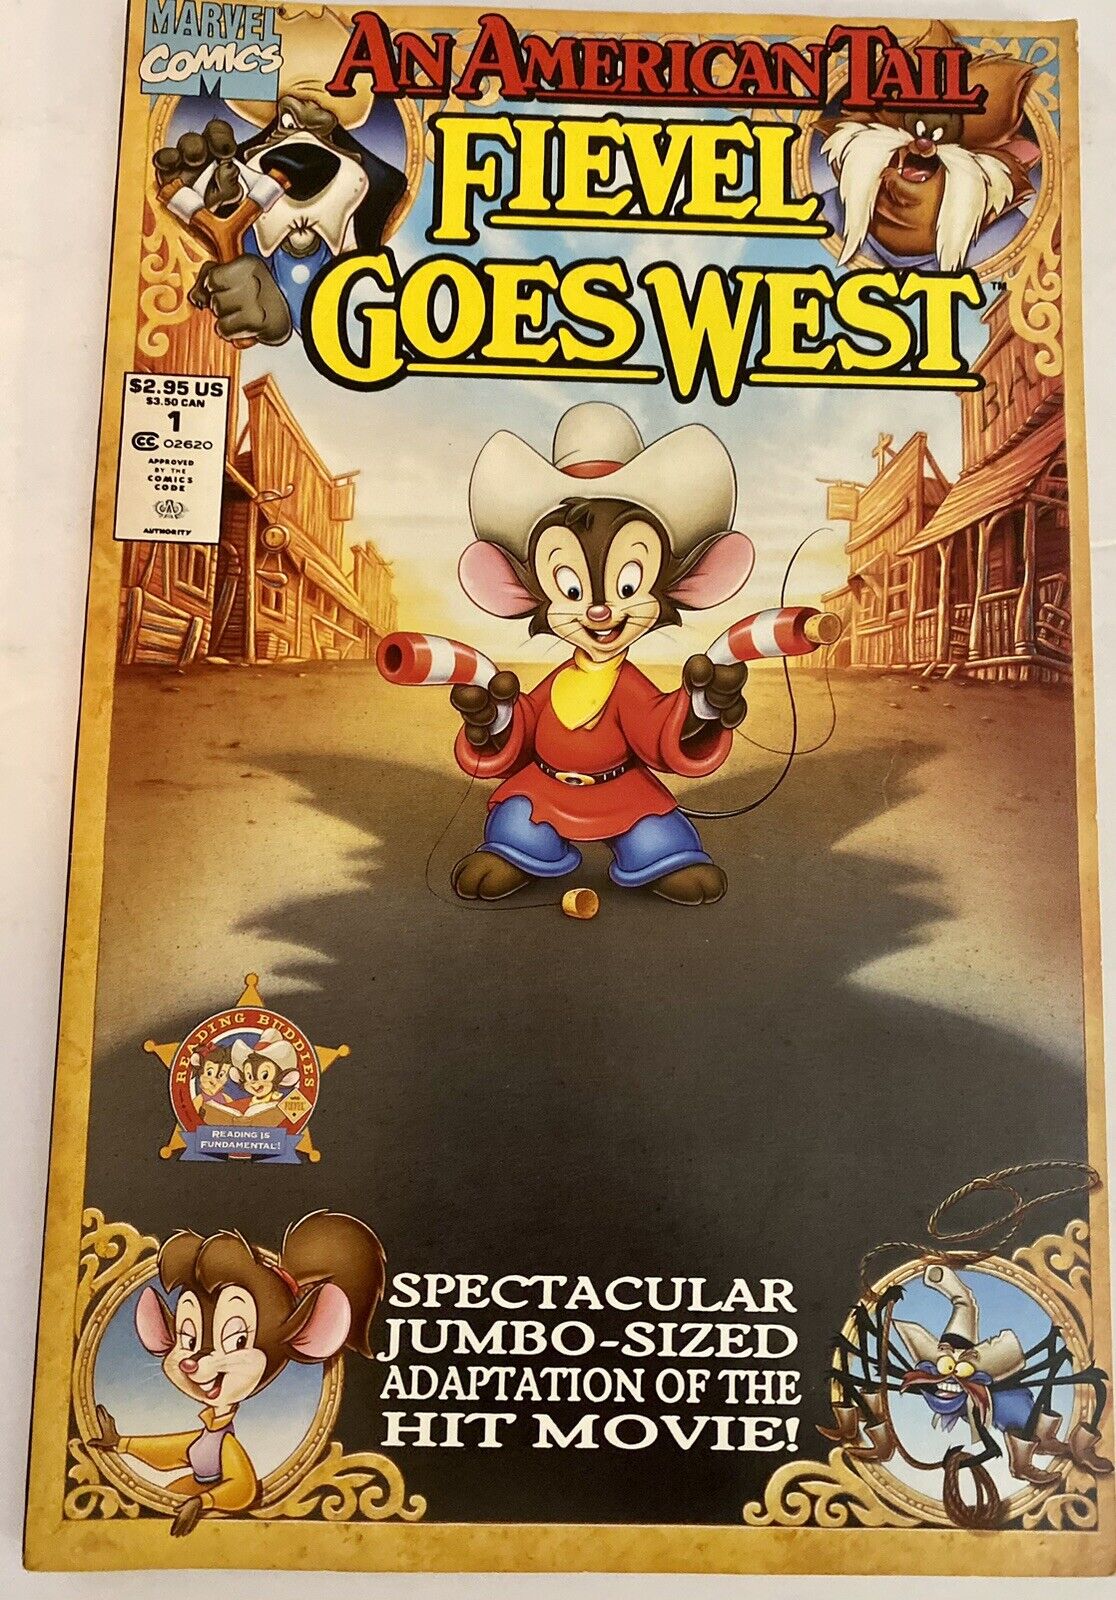 Vintage Marvel Comics An American Tail FIEVEL GOES WEST 1991 Comic Book